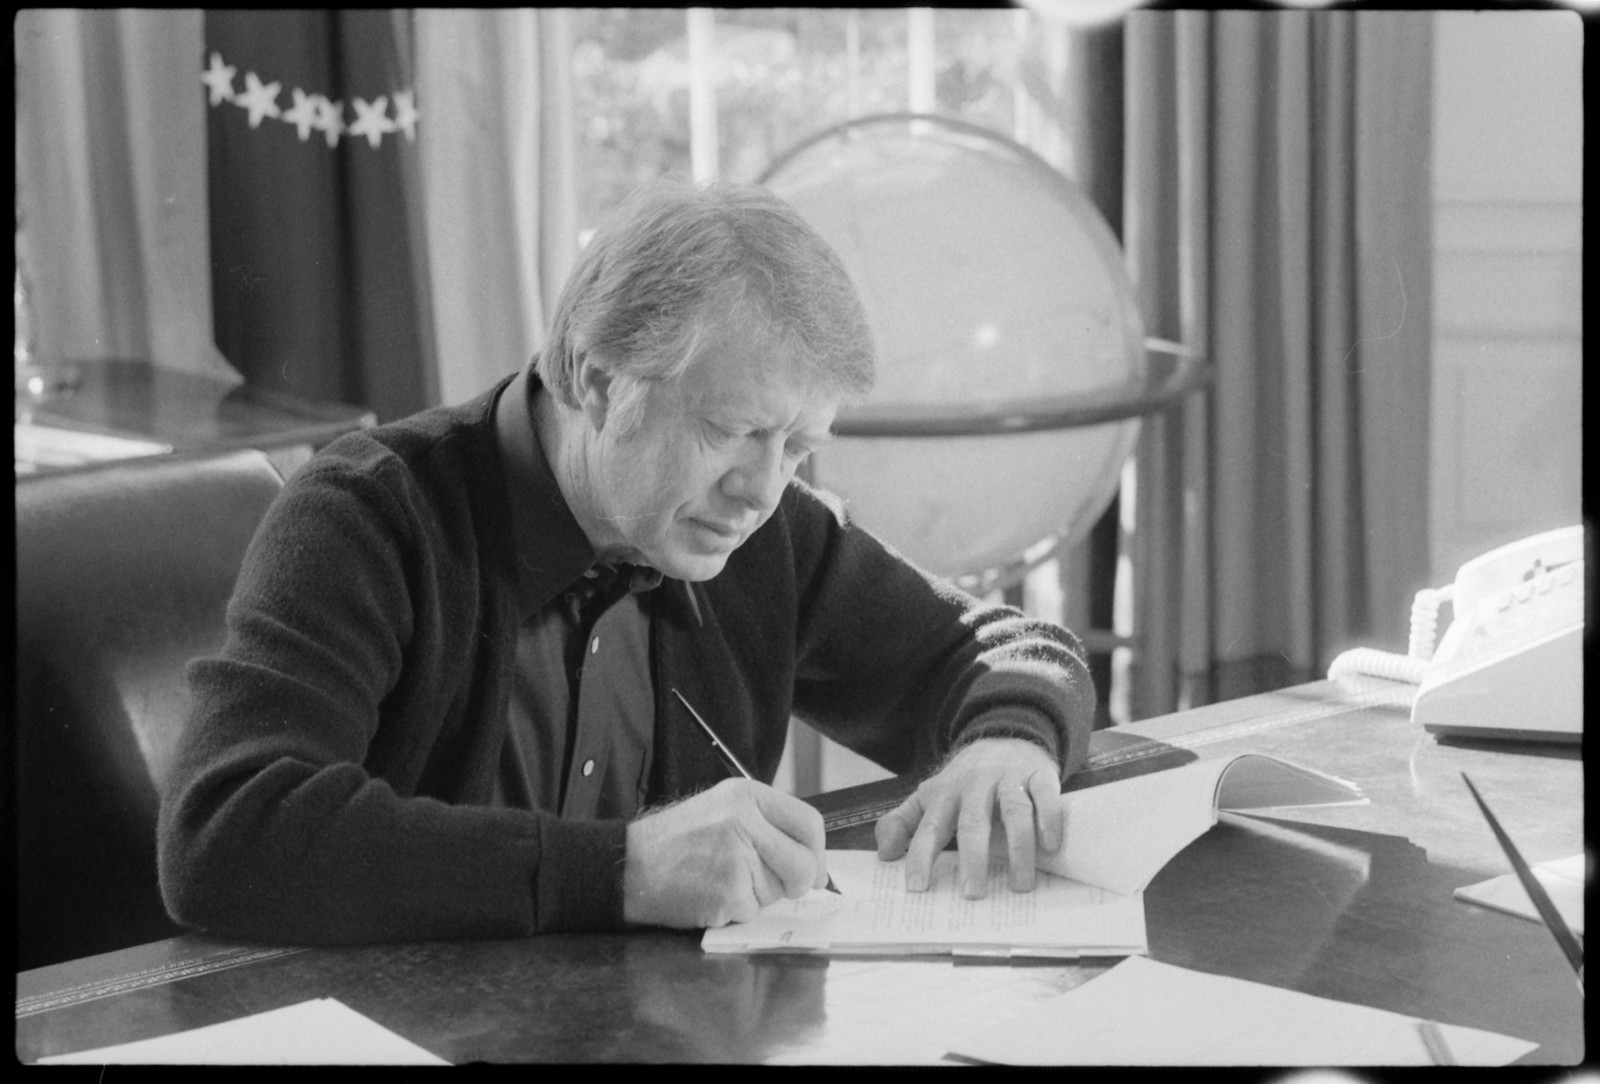 Even while in the White House, Jimmy Carter continued donating his A- blood on a regular basis.